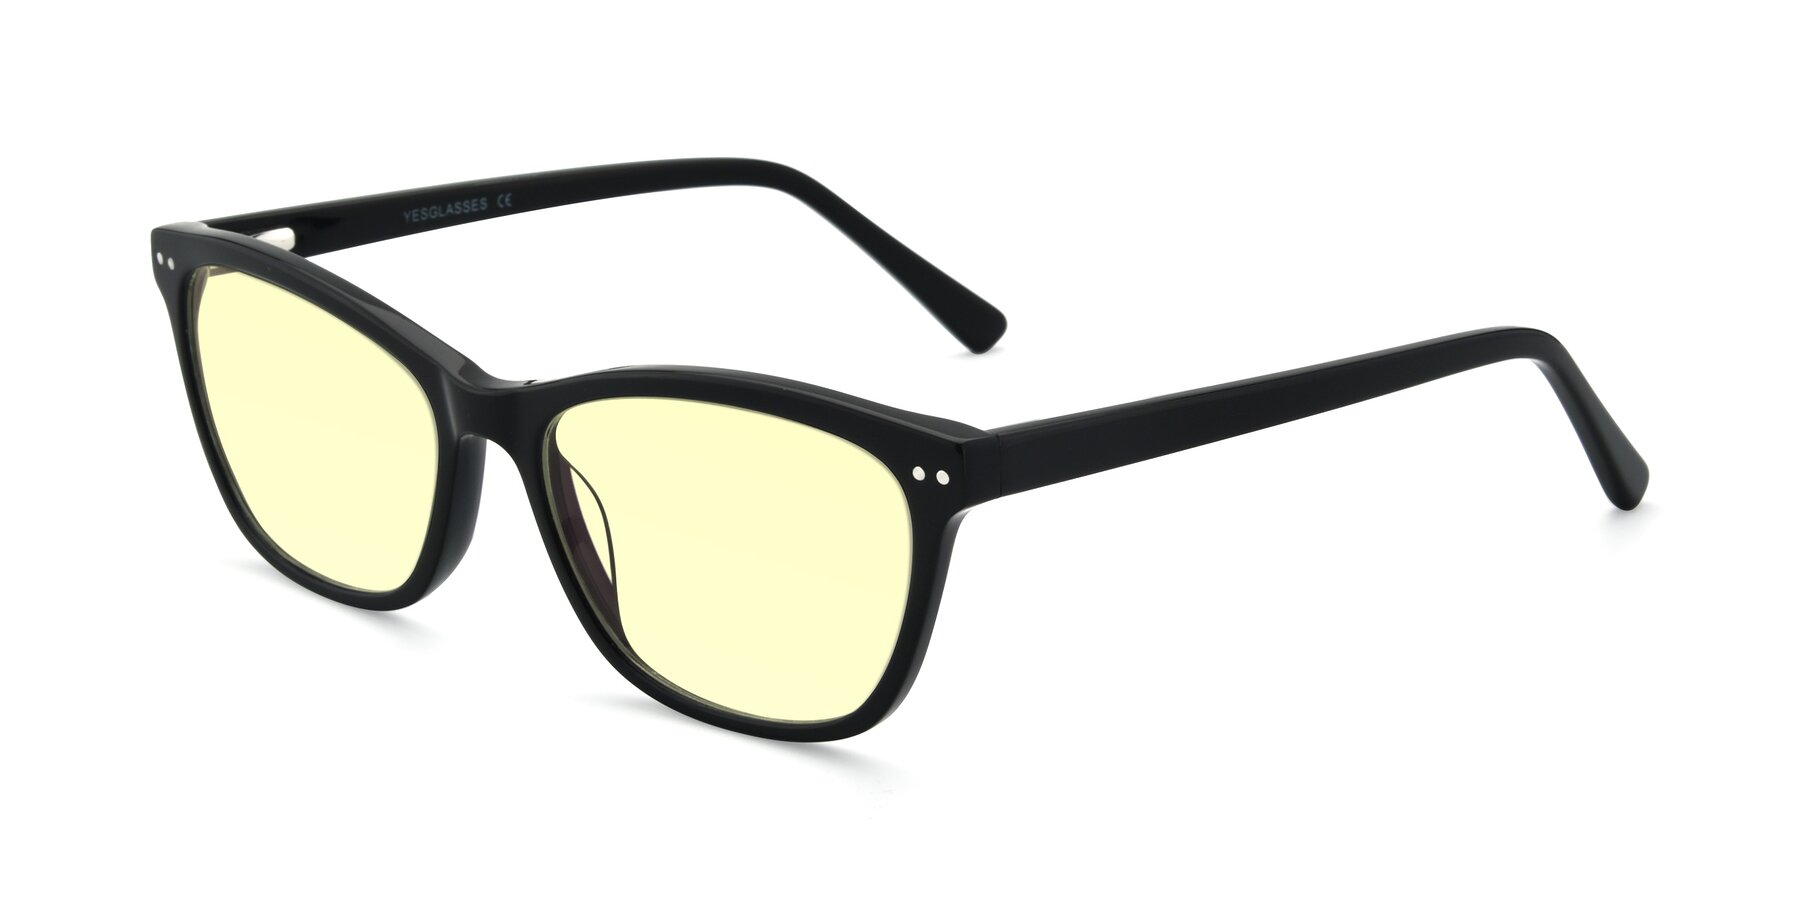 Angle of 17350 in Black with Light Yellow Tinted Lenses